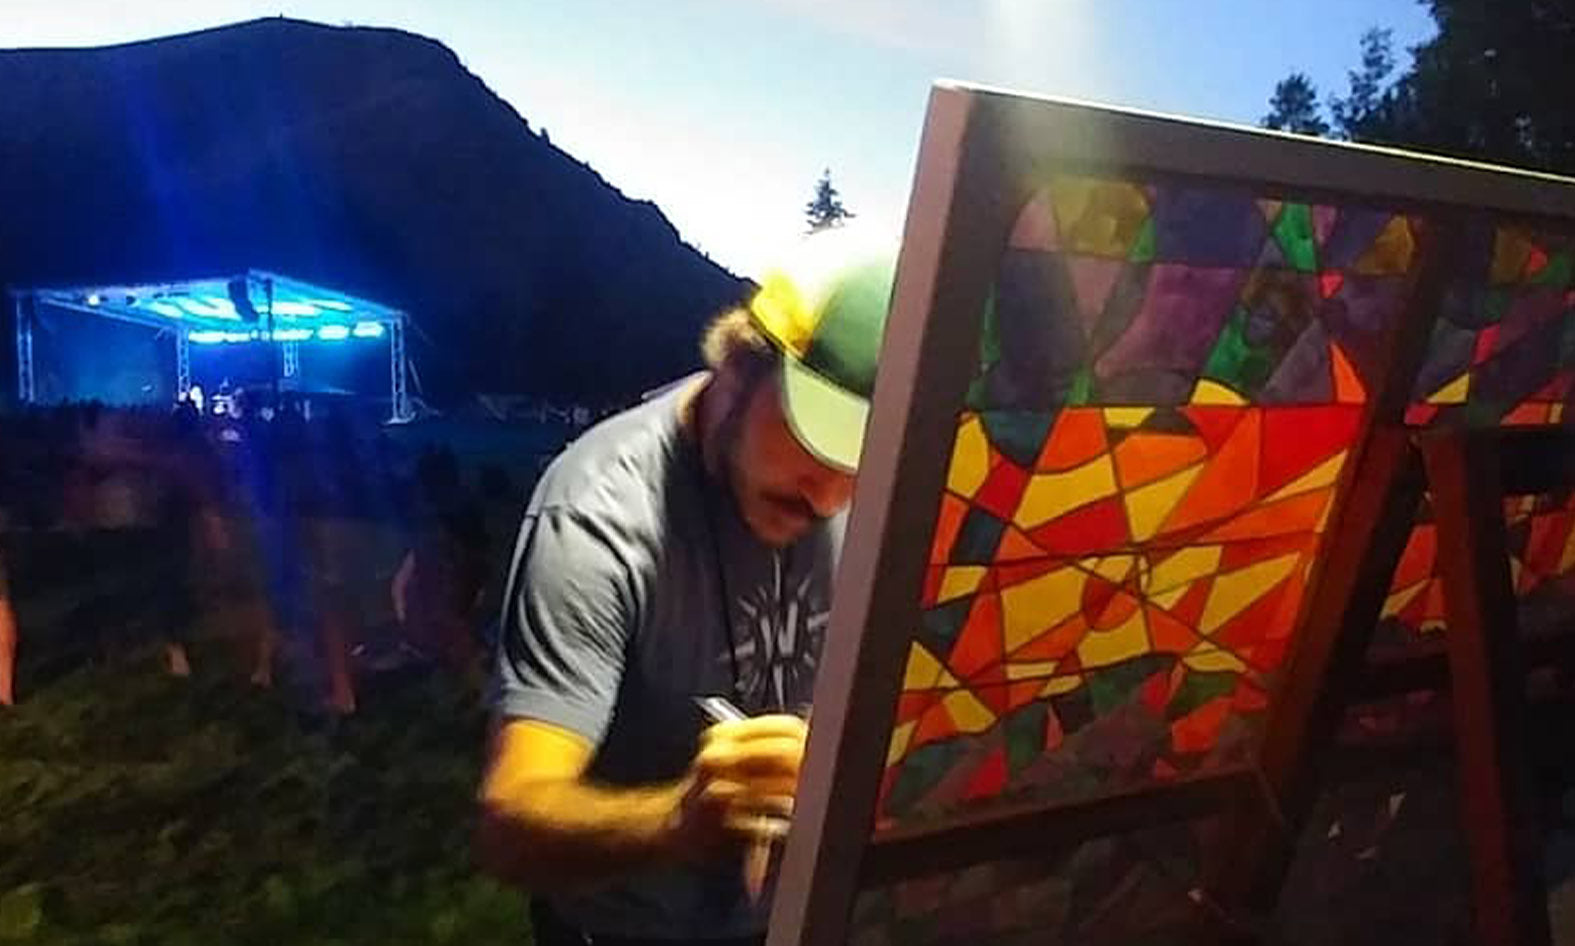 2019: Summer's End Festival Live Painting & Merch Booth